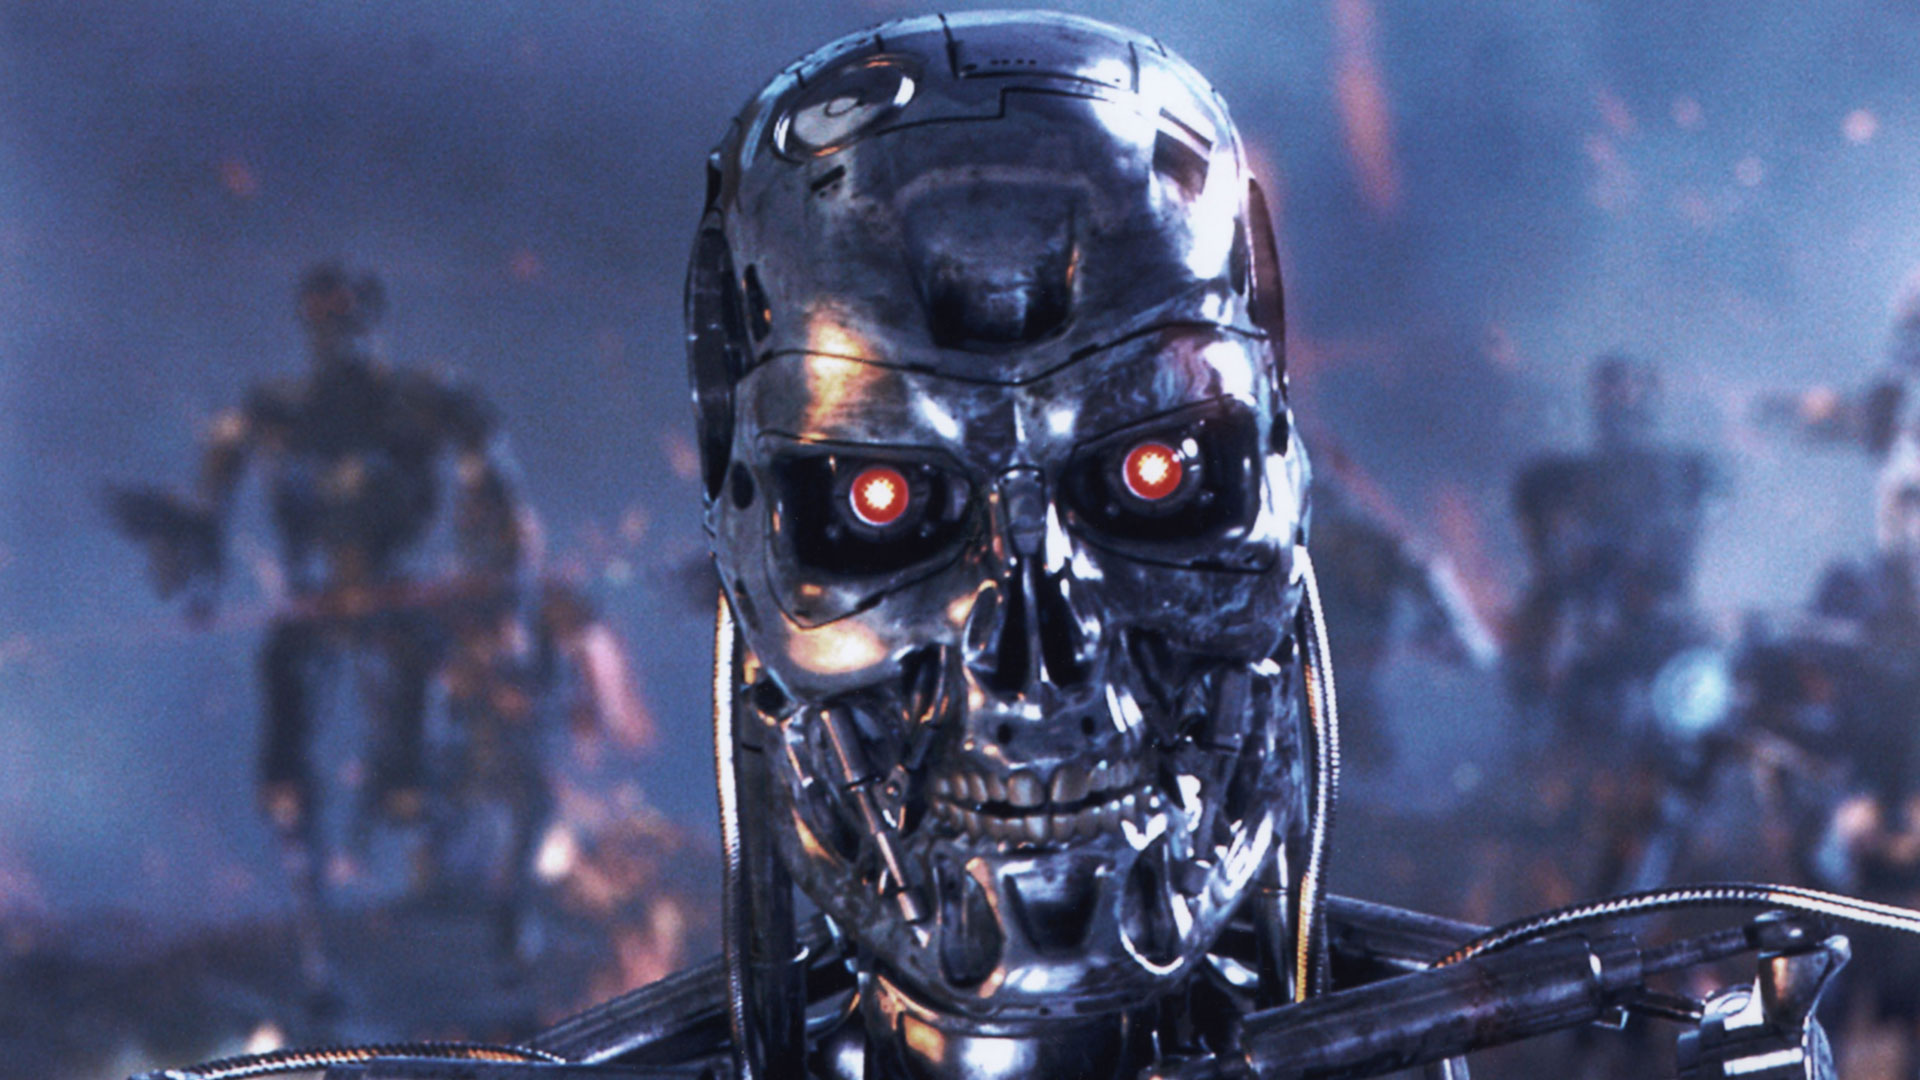 Act now to stop Terminator future, says ethicist William MacAskill